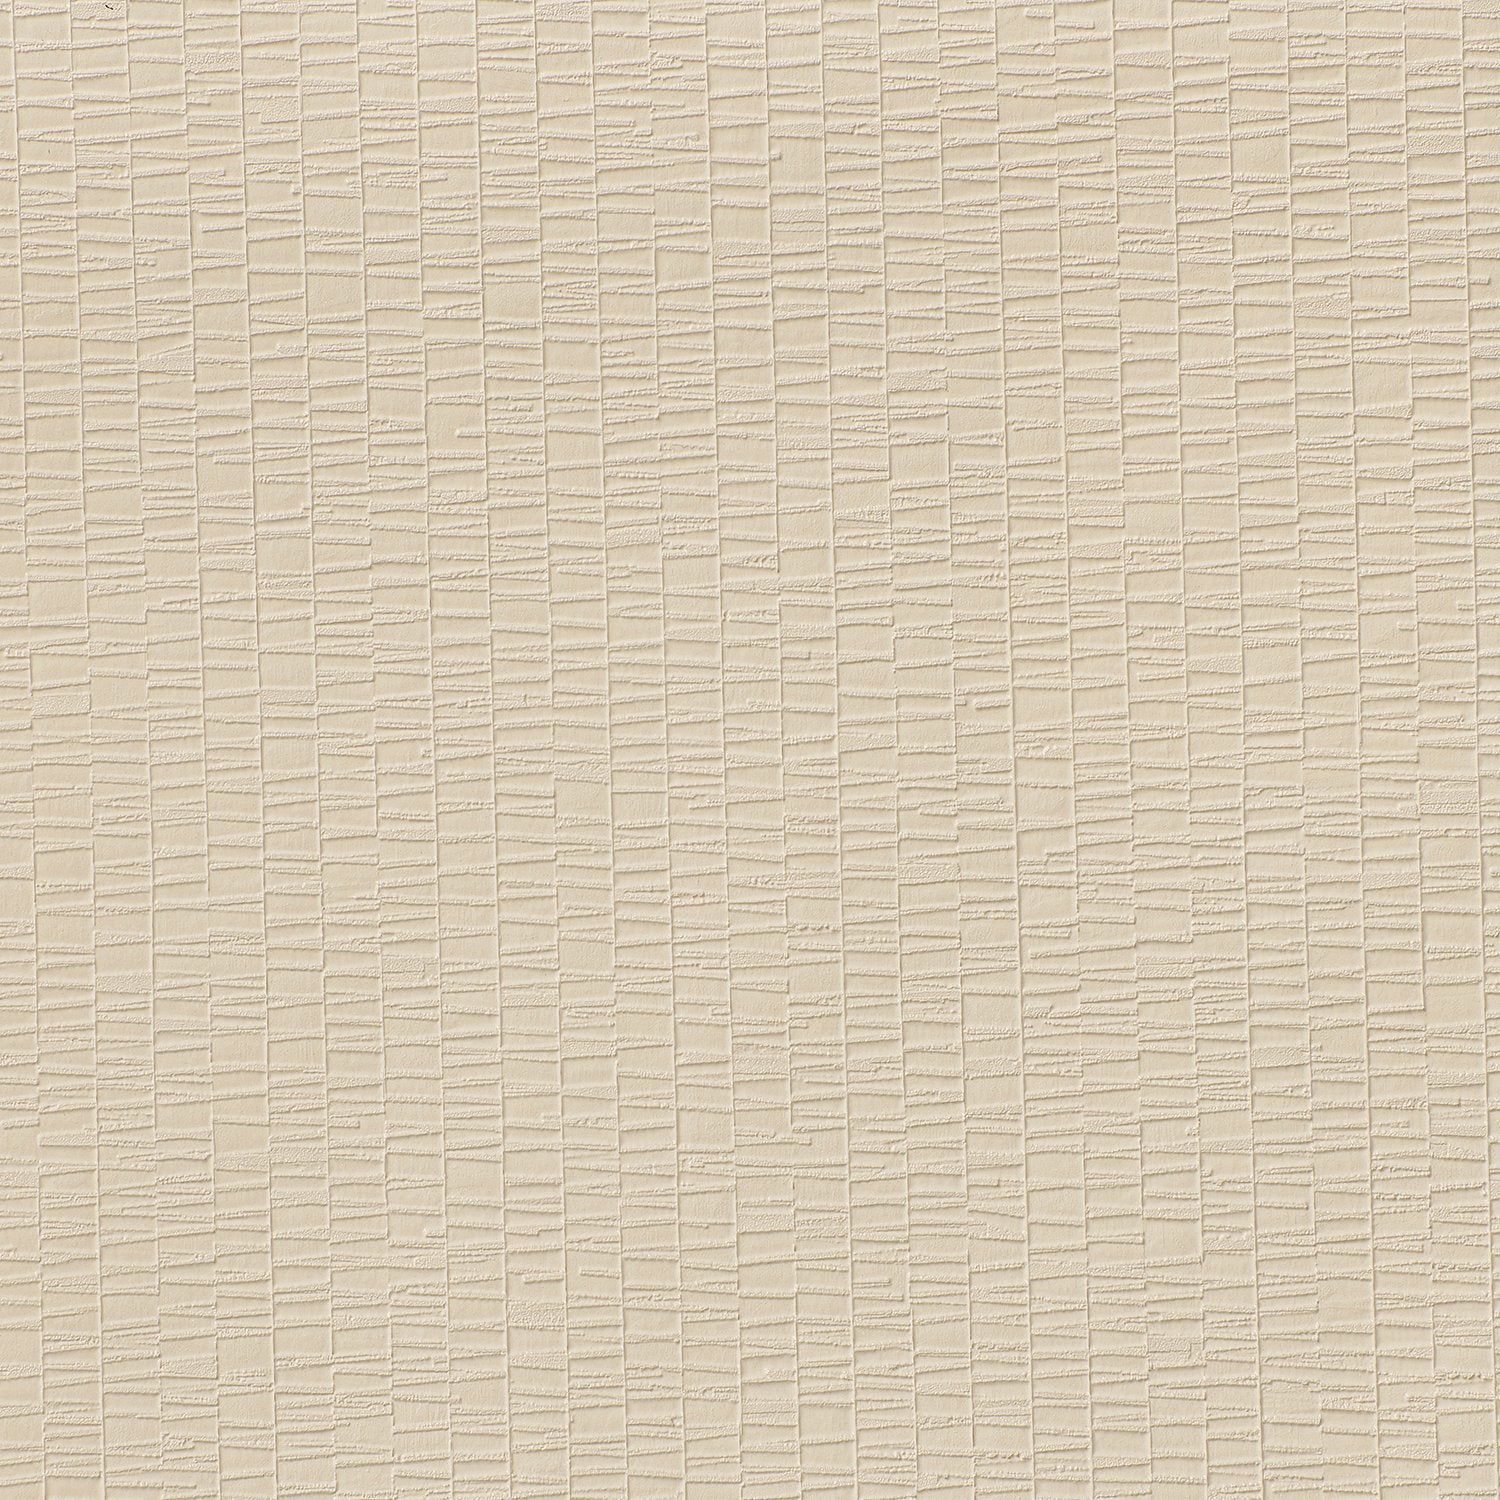 Stagger - Y47762 Porcelain - Wallcovering - Vycon - Kube Contract